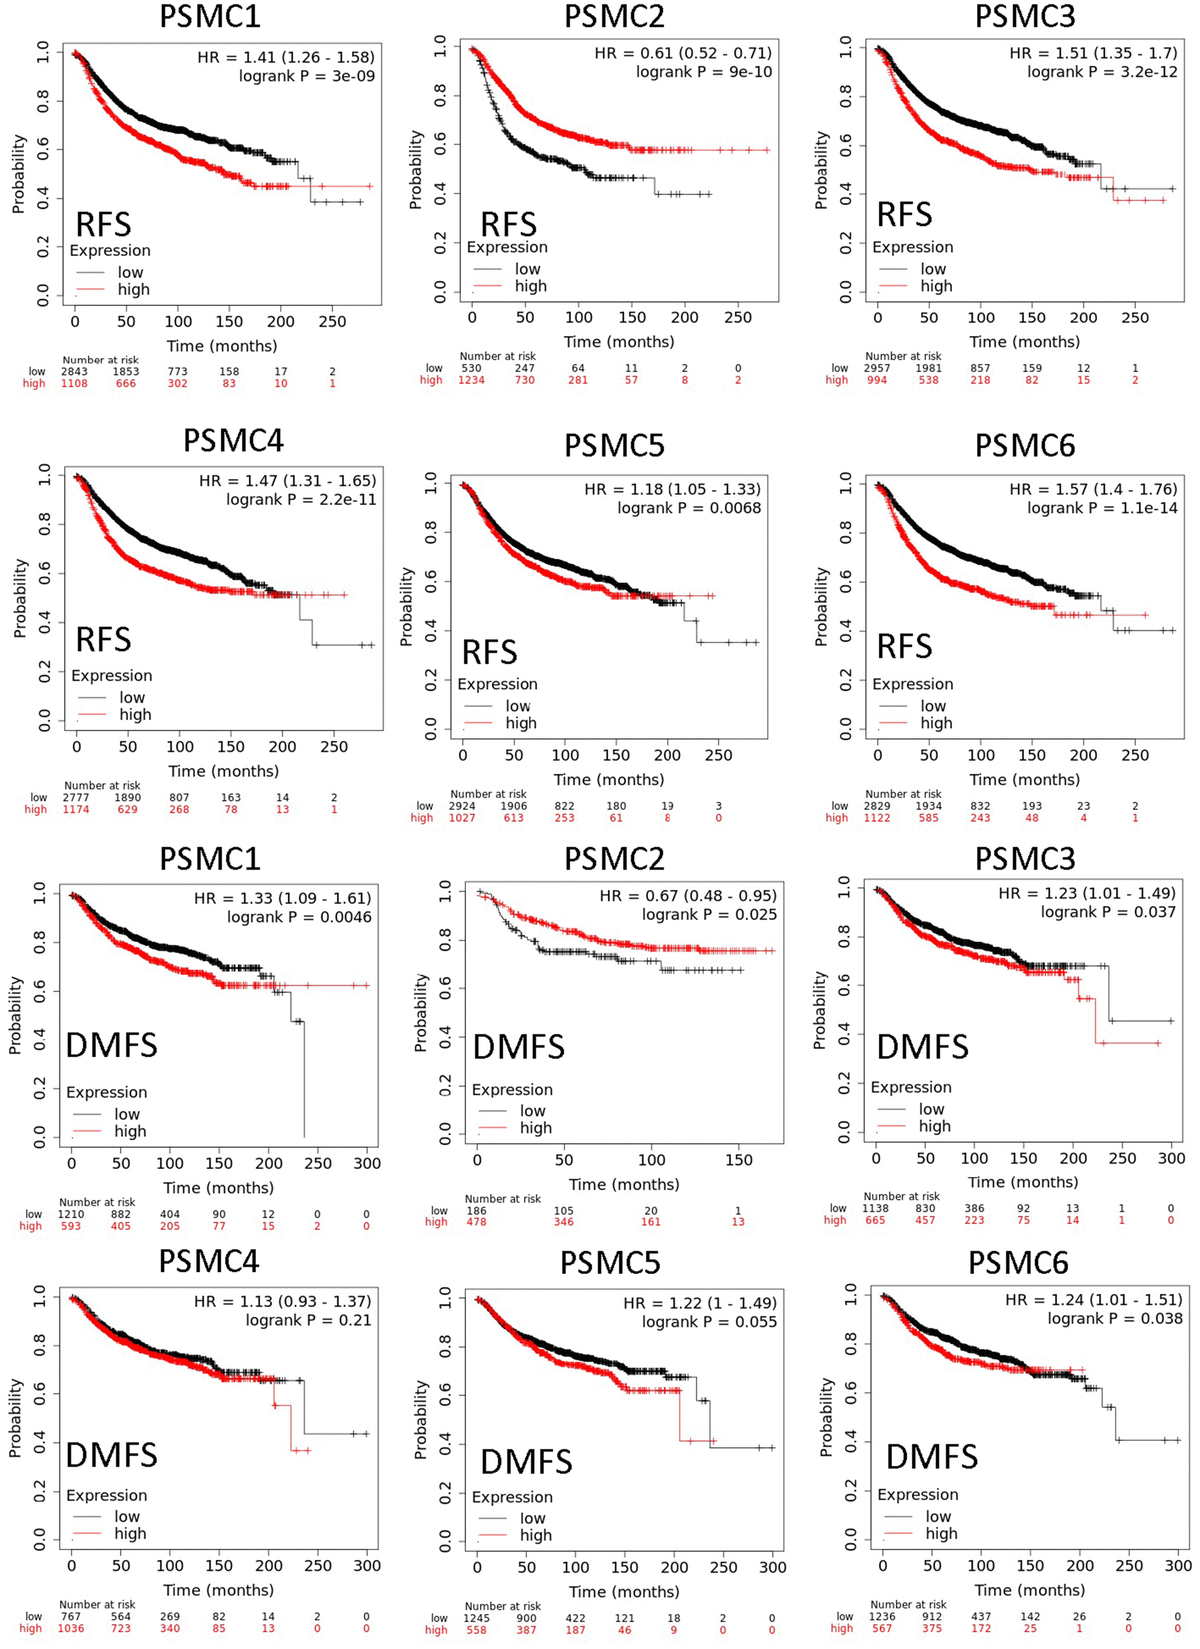 Relationship between expressions of proteasome 26S subunit, ATPase (PSMC) family members with recurrence-free survival (RFS) and distant metastasis-free survival (DMFS) from clinical breast cancer patients (n=2898). Kaplan–Meier plots show correlations of RFS and DMFS in breast cancer patients with high and low expression levels of PSMC family members using the median of expression as the cutoff. Red and black lines respectively represent higher and lower values than the median. High expression levels of most PSMC members were associated with poor survival, whereas high expression levels of PSMC2 were associated with significantly better survival rates (p